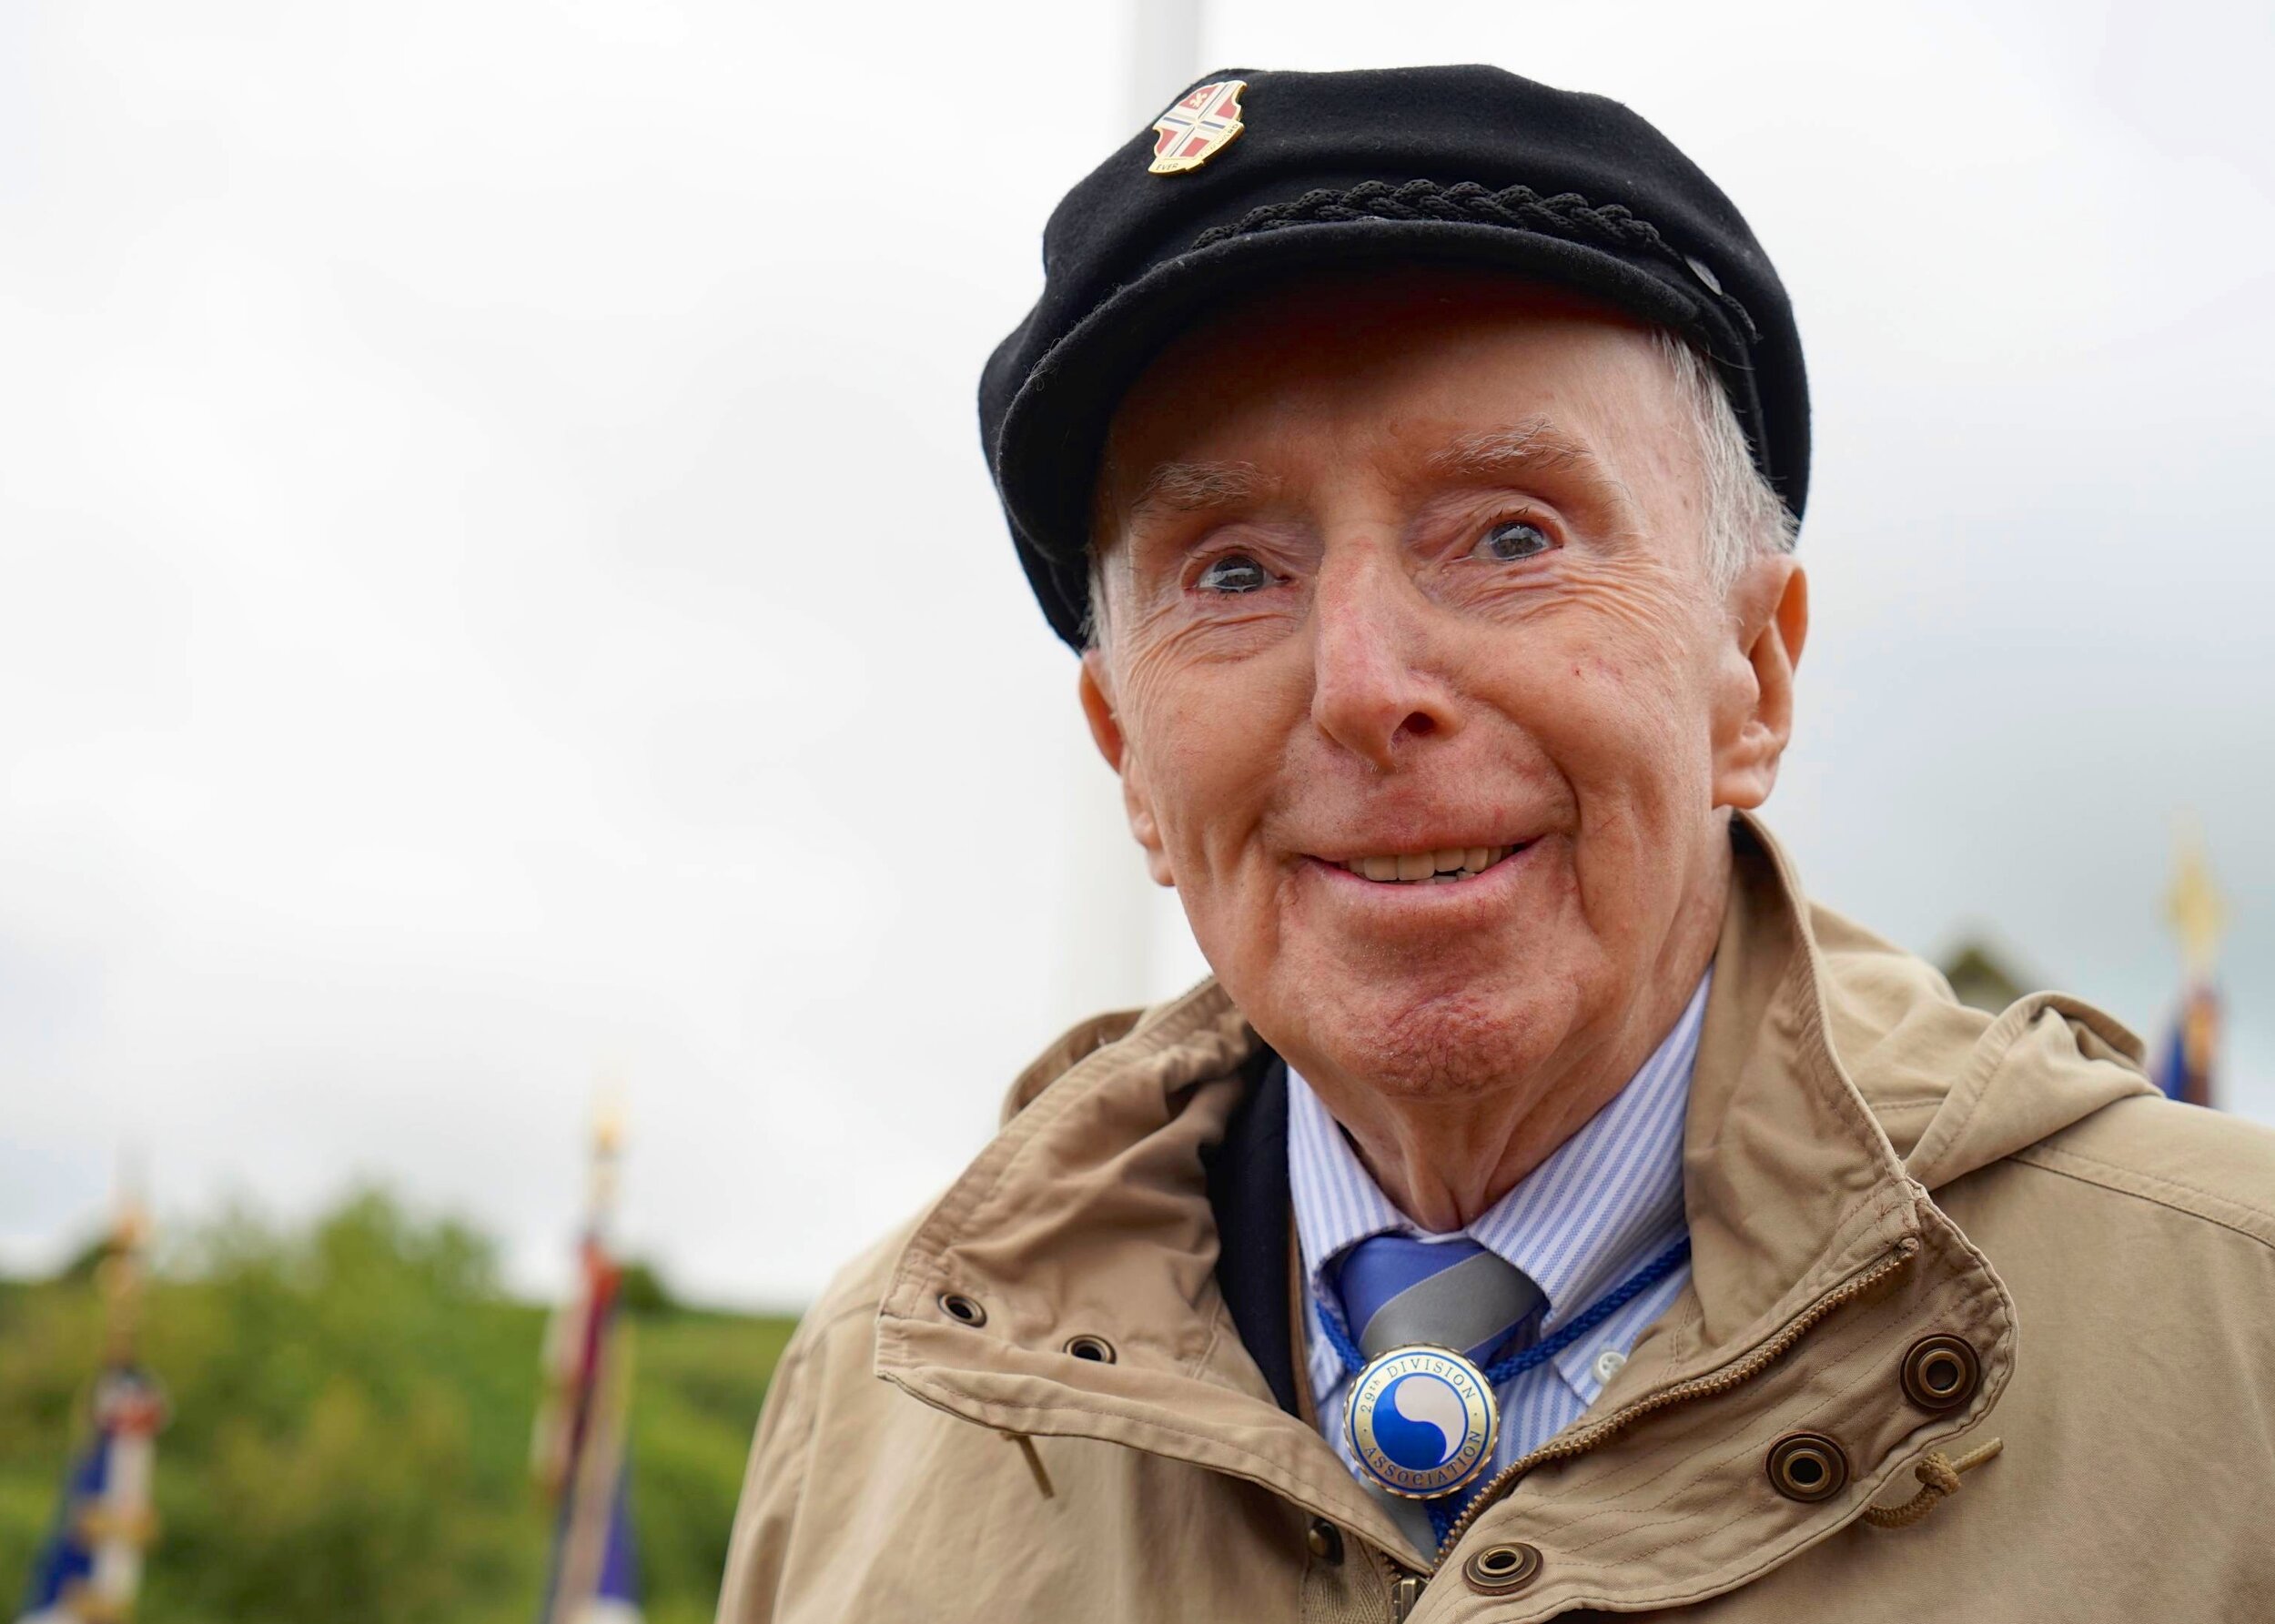  D-Day veteran Donald McCarthy revisits Omaha Beach. Don is a Boston native who joined the 29th Infantry Division in England in early 1944 as a member of the 116th Infantry's 1st Battalion. His landing craft capsized on D-Day, and later he was wounde